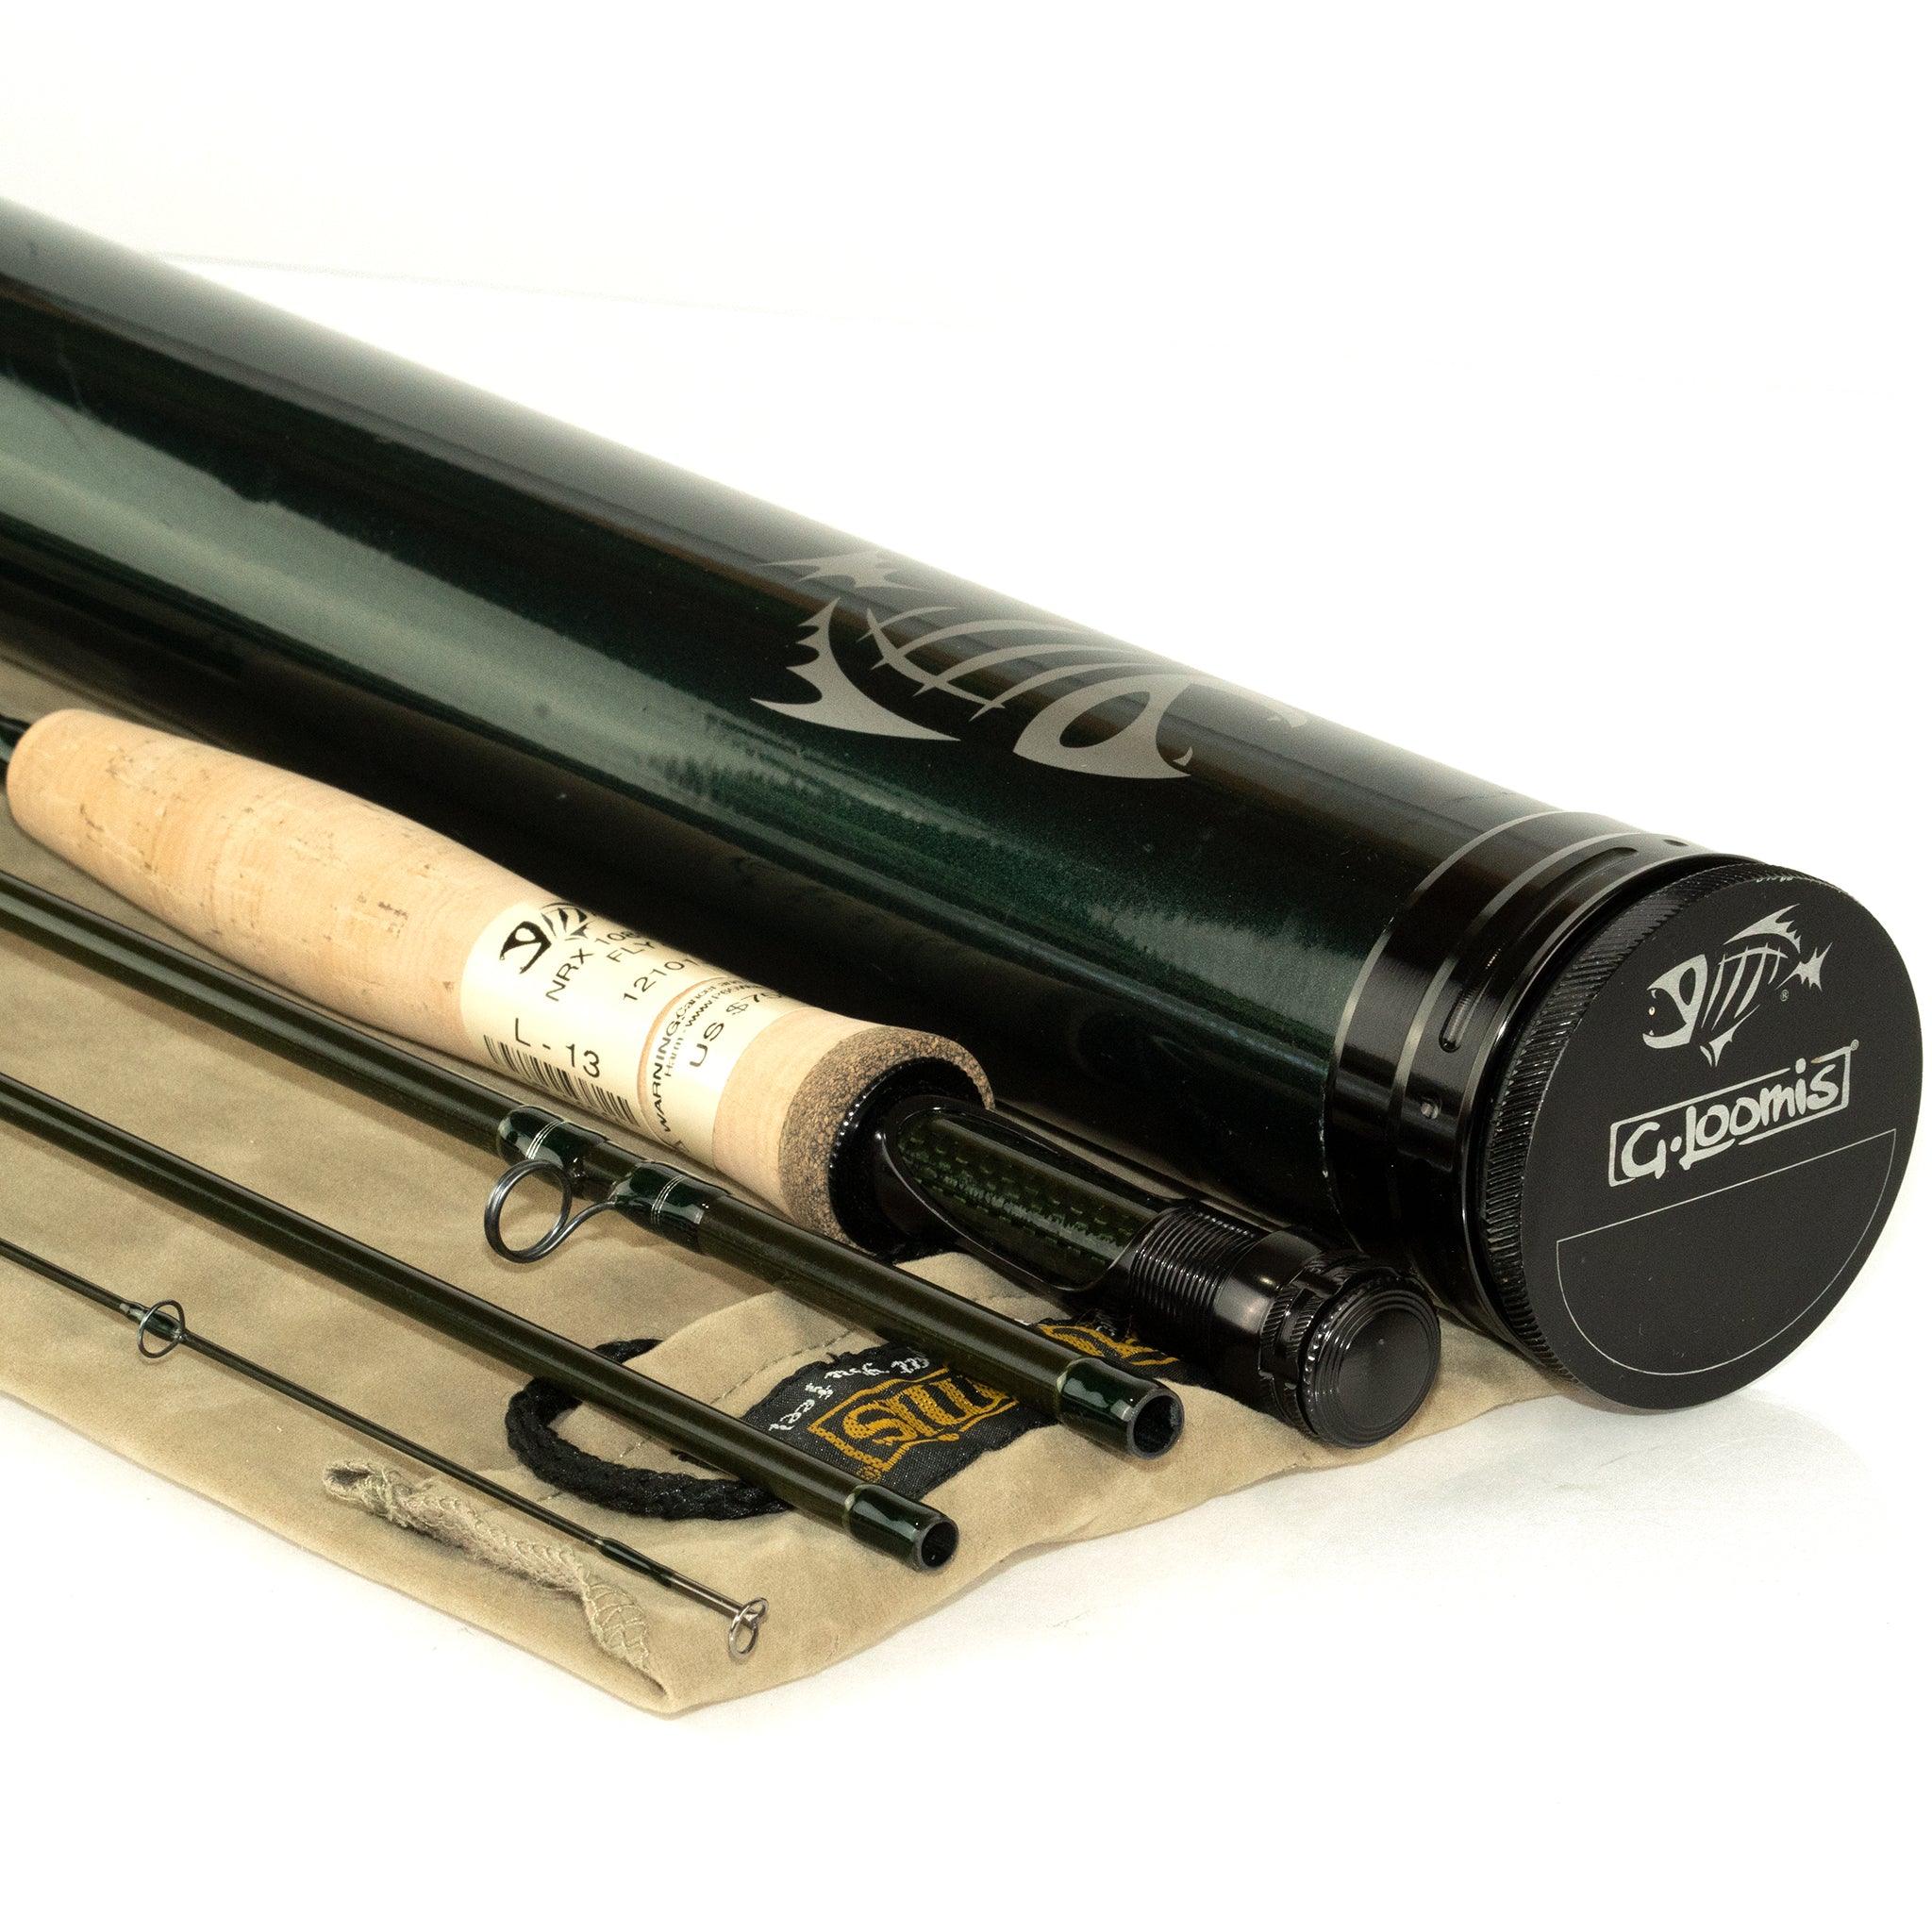 GLoomis NRX 590-4 Fly Rod - 5wt 9ft 0in 4pc – Outfishers